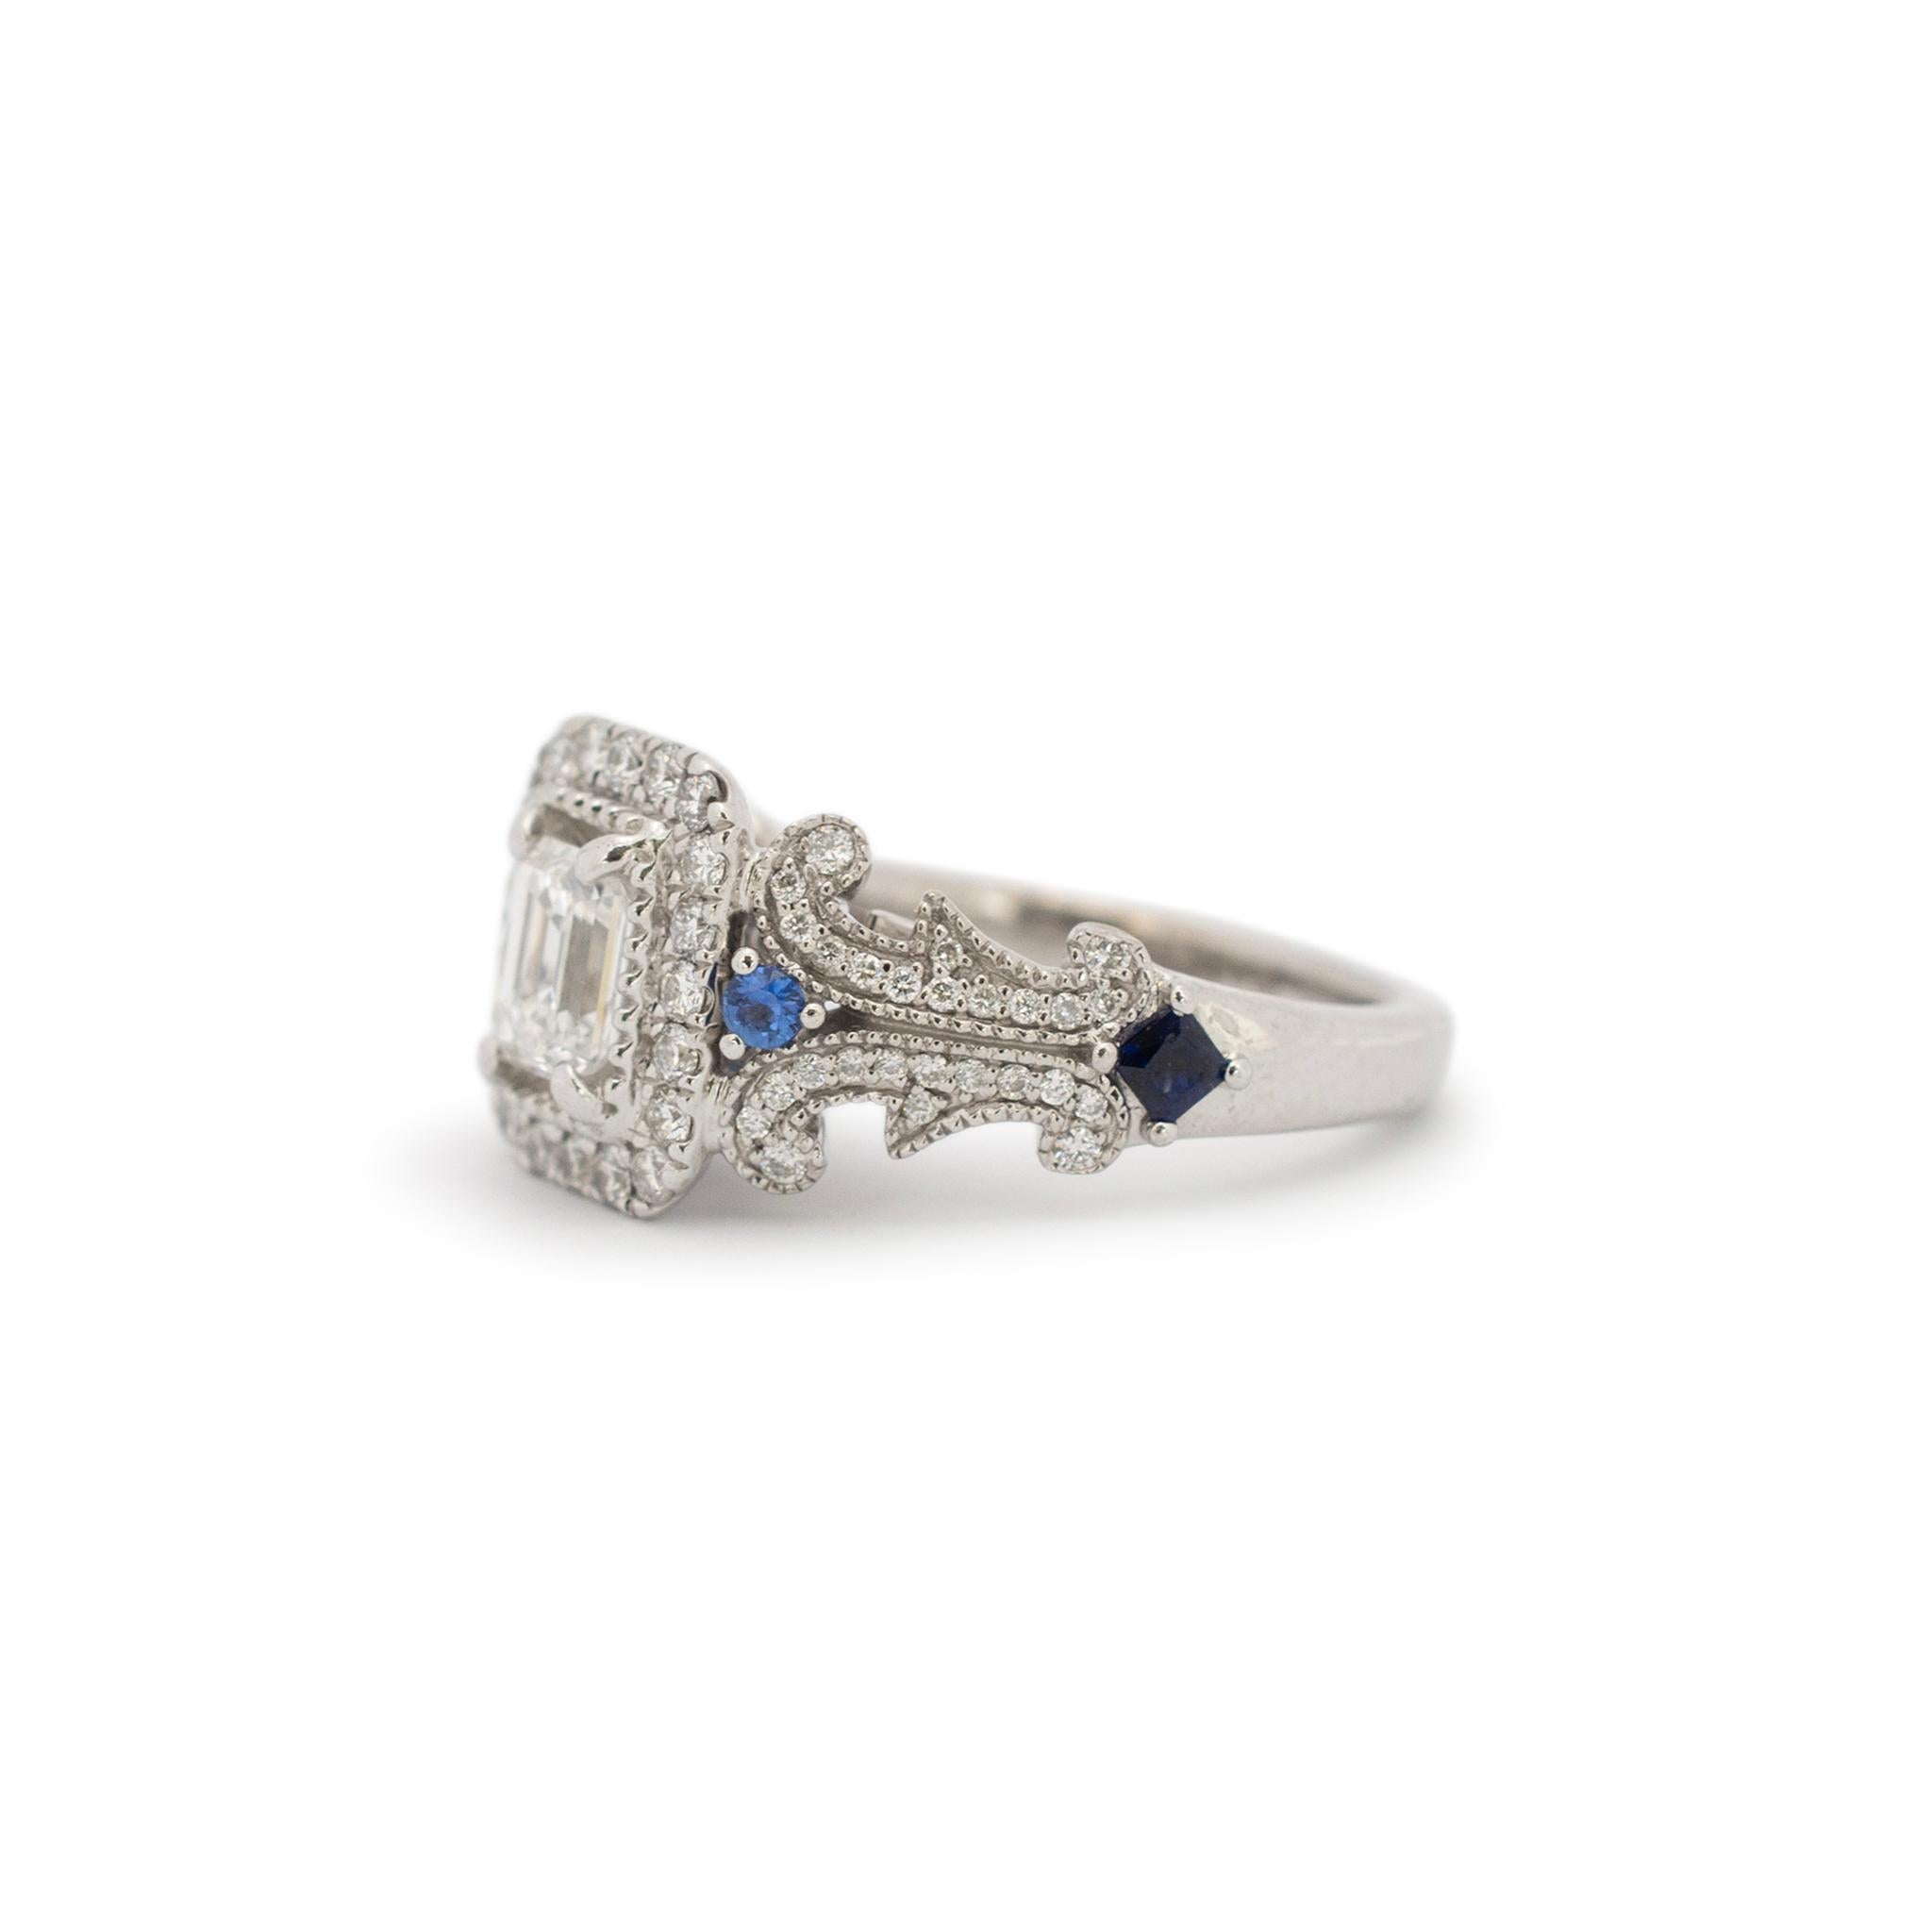 Gender: Ladies

Metal Type: 14K White Gold

Size: 5.5

Weight: 7.00 grams

Ladies 14K white gold diamond and sapphire engagement halo ring with a half round shank. Engraved with 